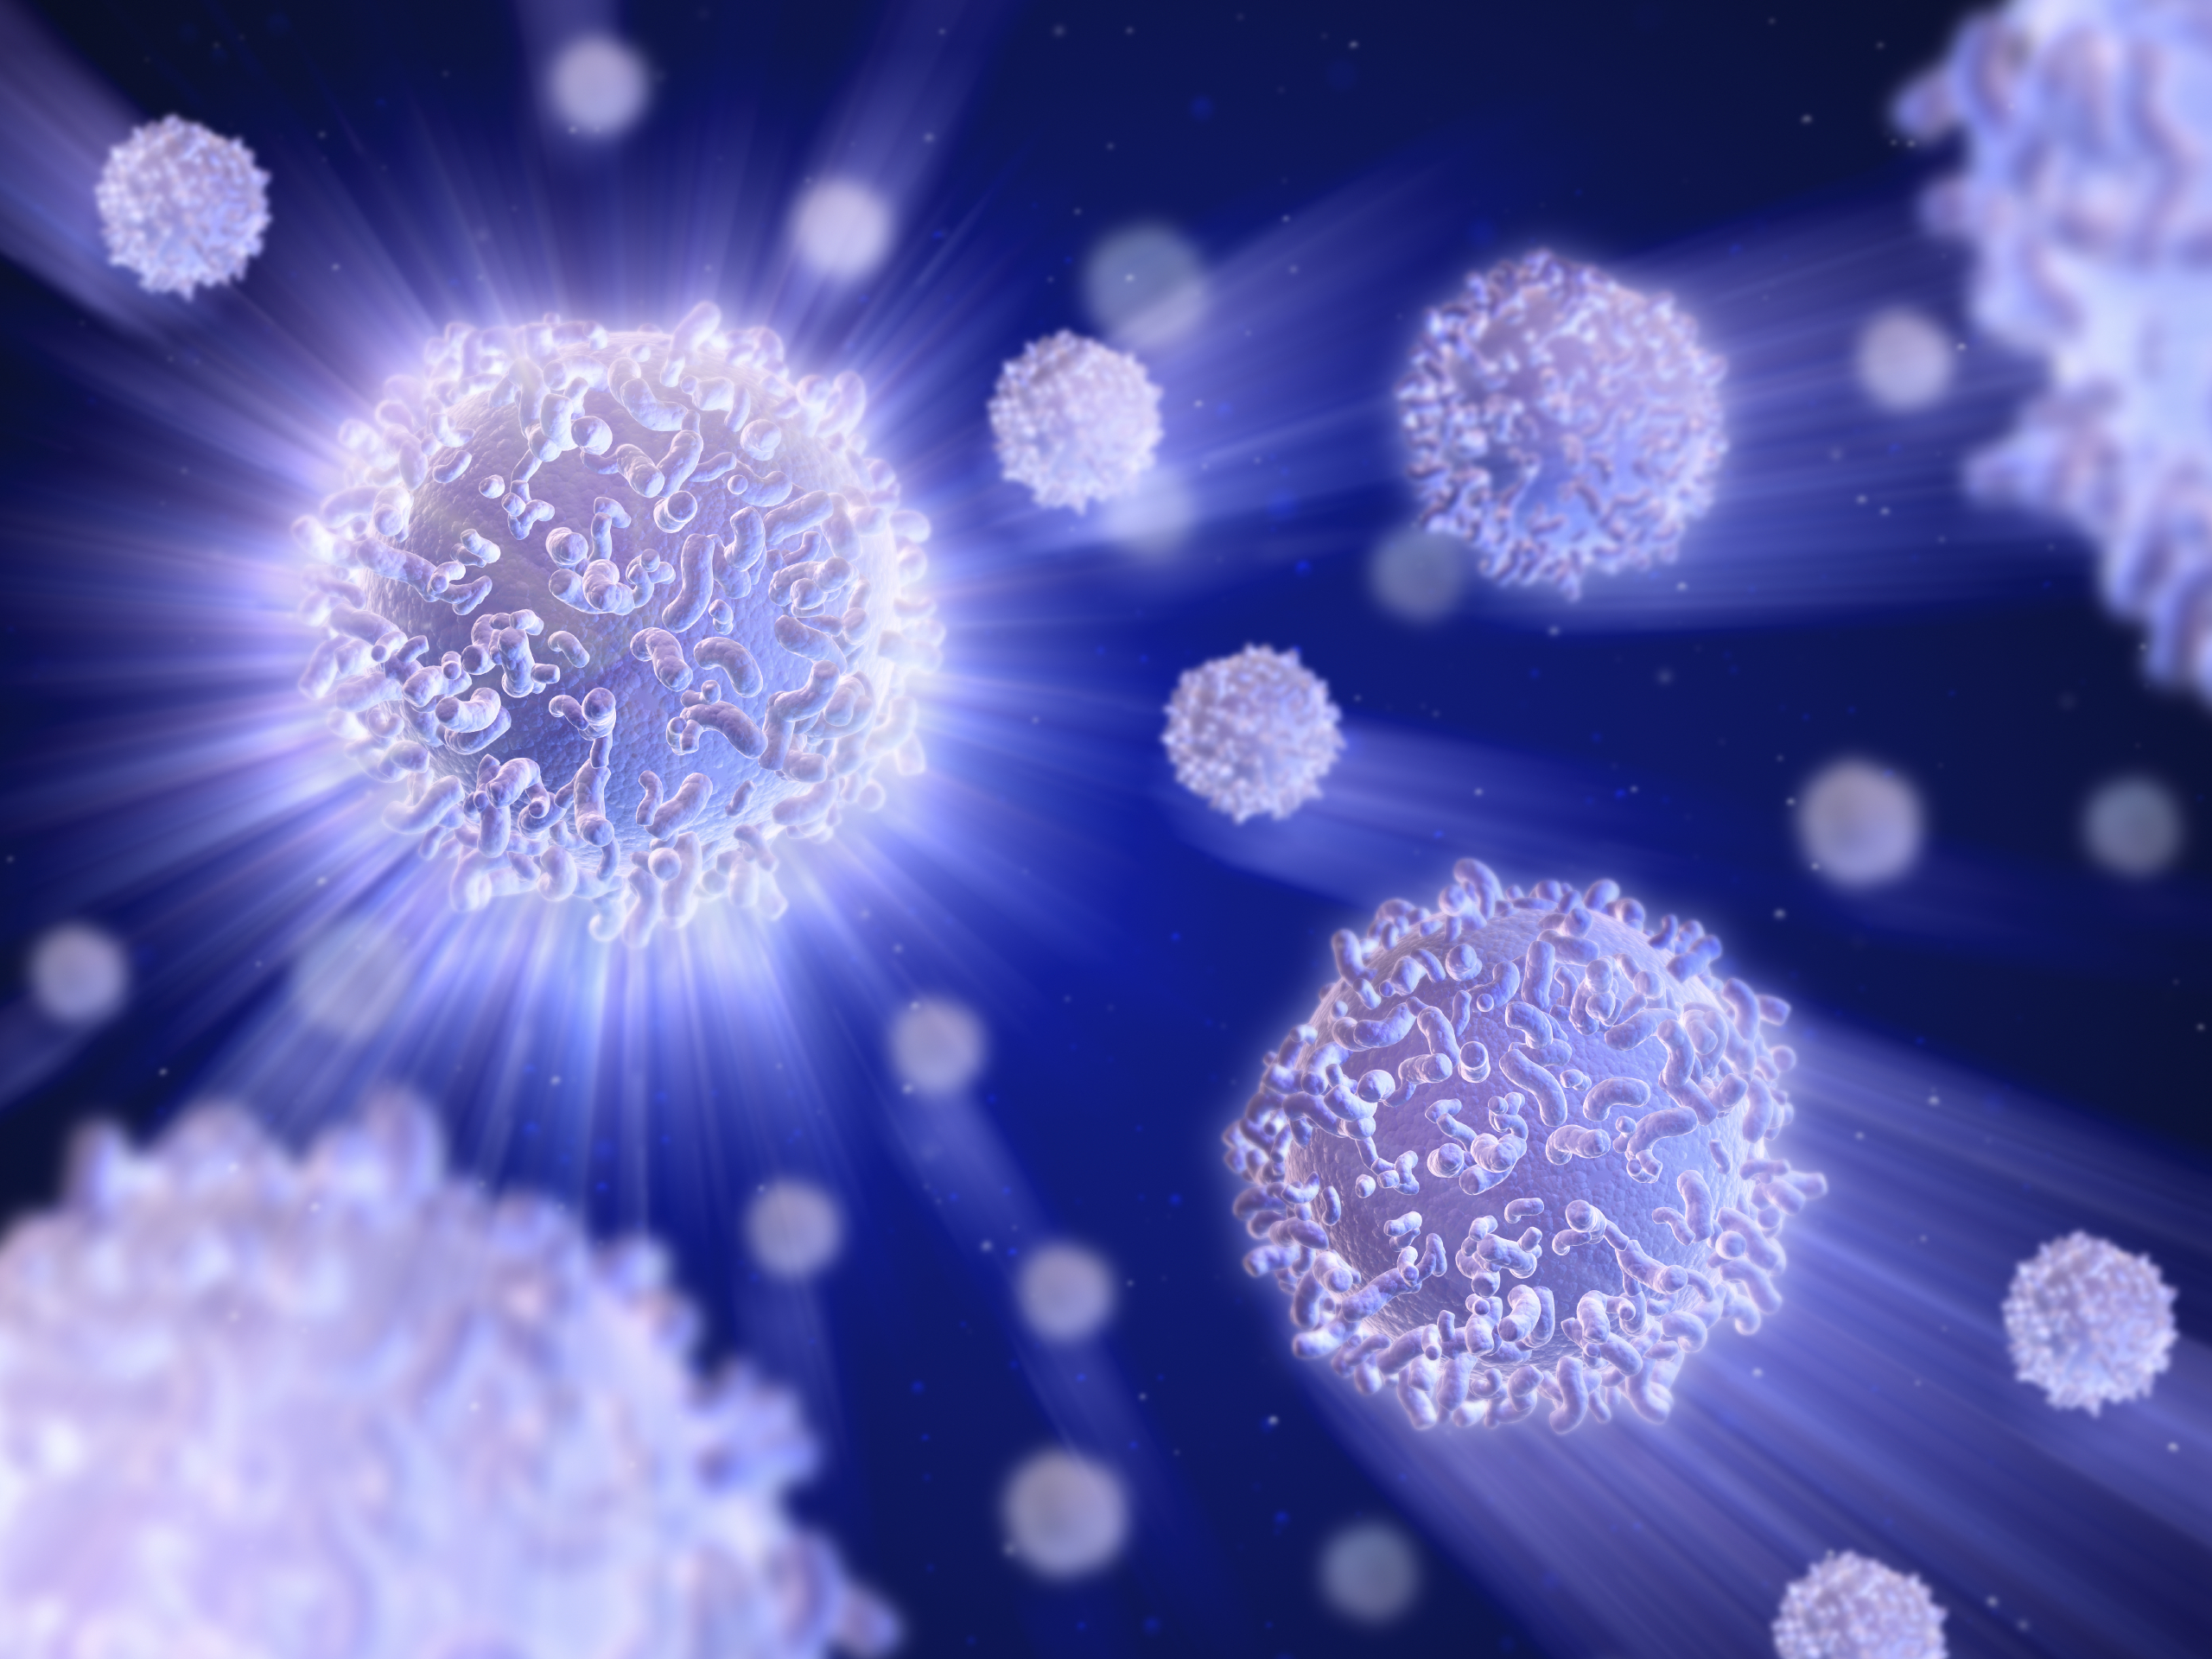 Computer generated illustration of white blood cells that form human immune system